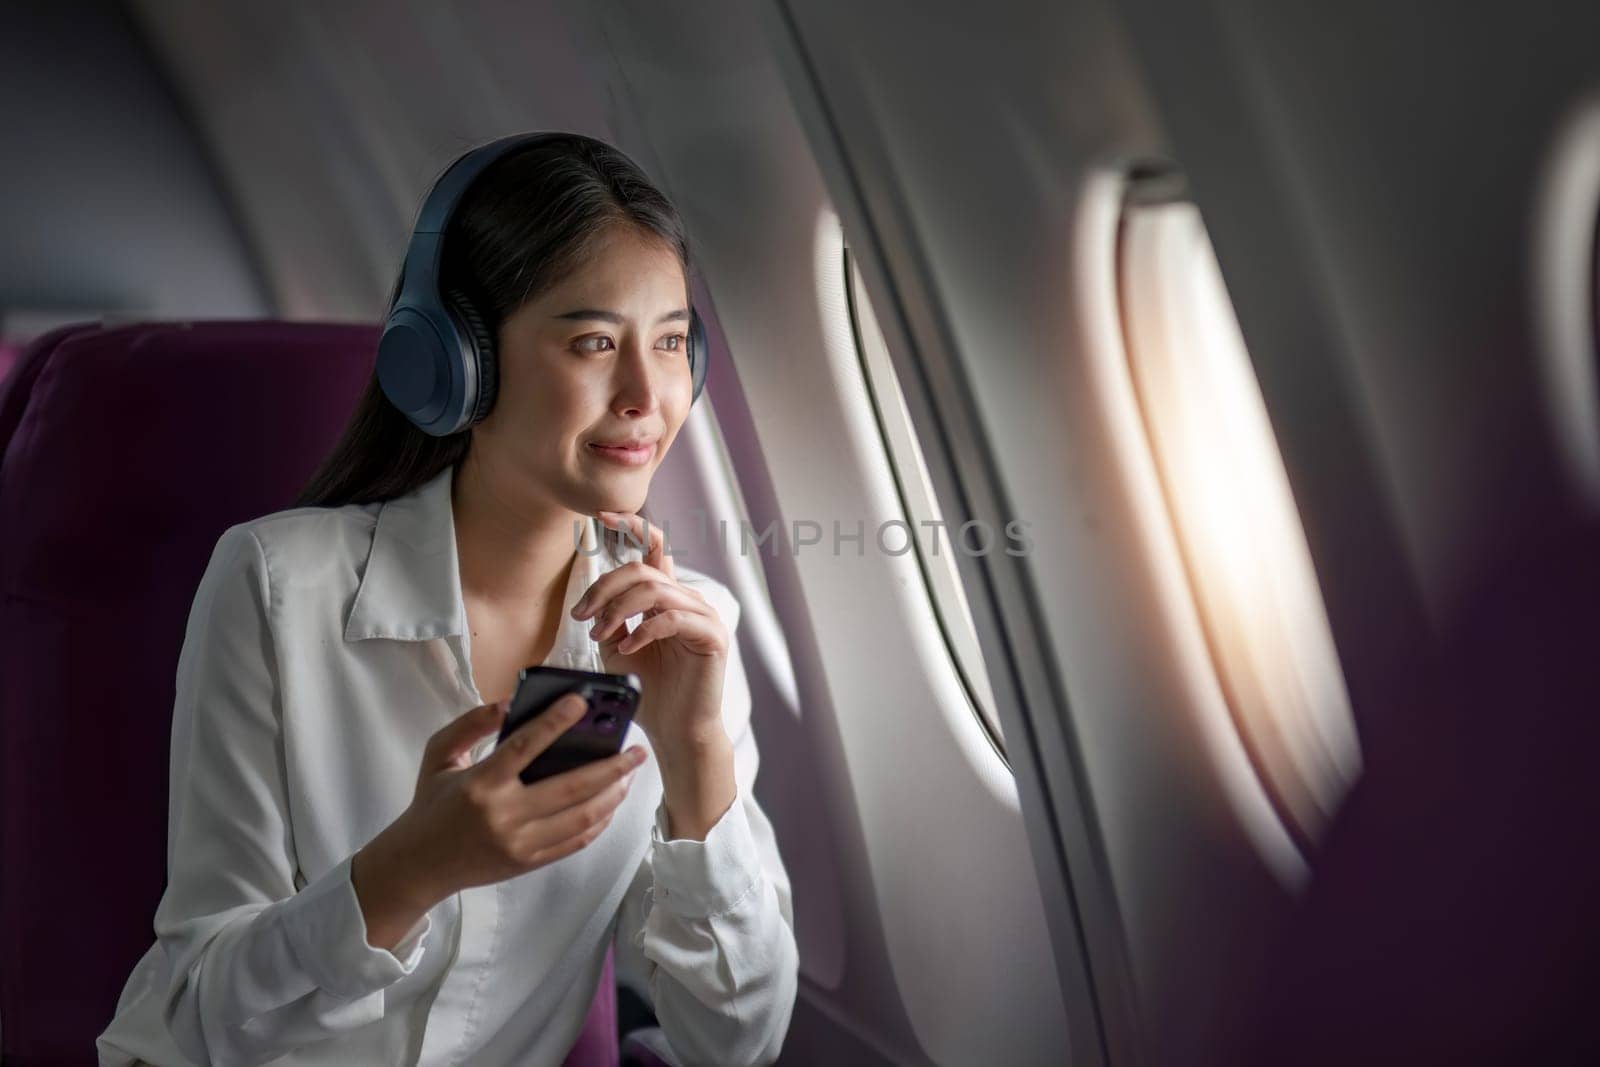 Asian woman sitting and using a smartphone in an airplane Listening to music next to the airplane seat window travel and technology concept.